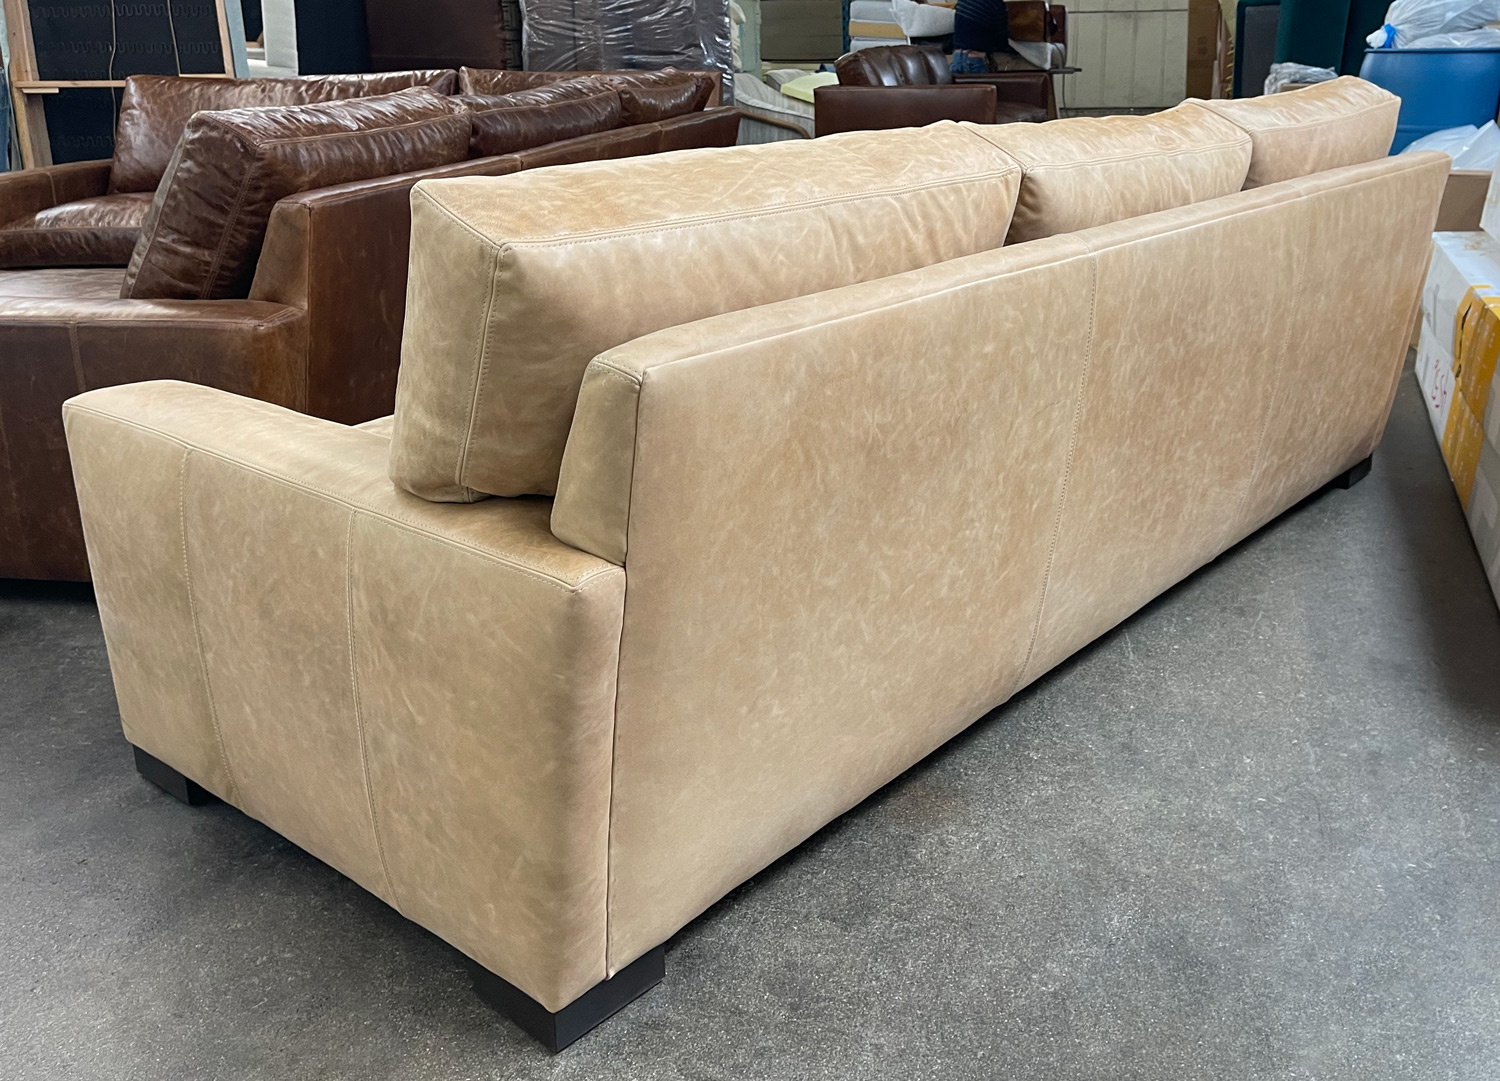 Braxton Leather Sofa in Berkshire Camel Leather - 96 x 43 - 3 over 3 - LAF rear view